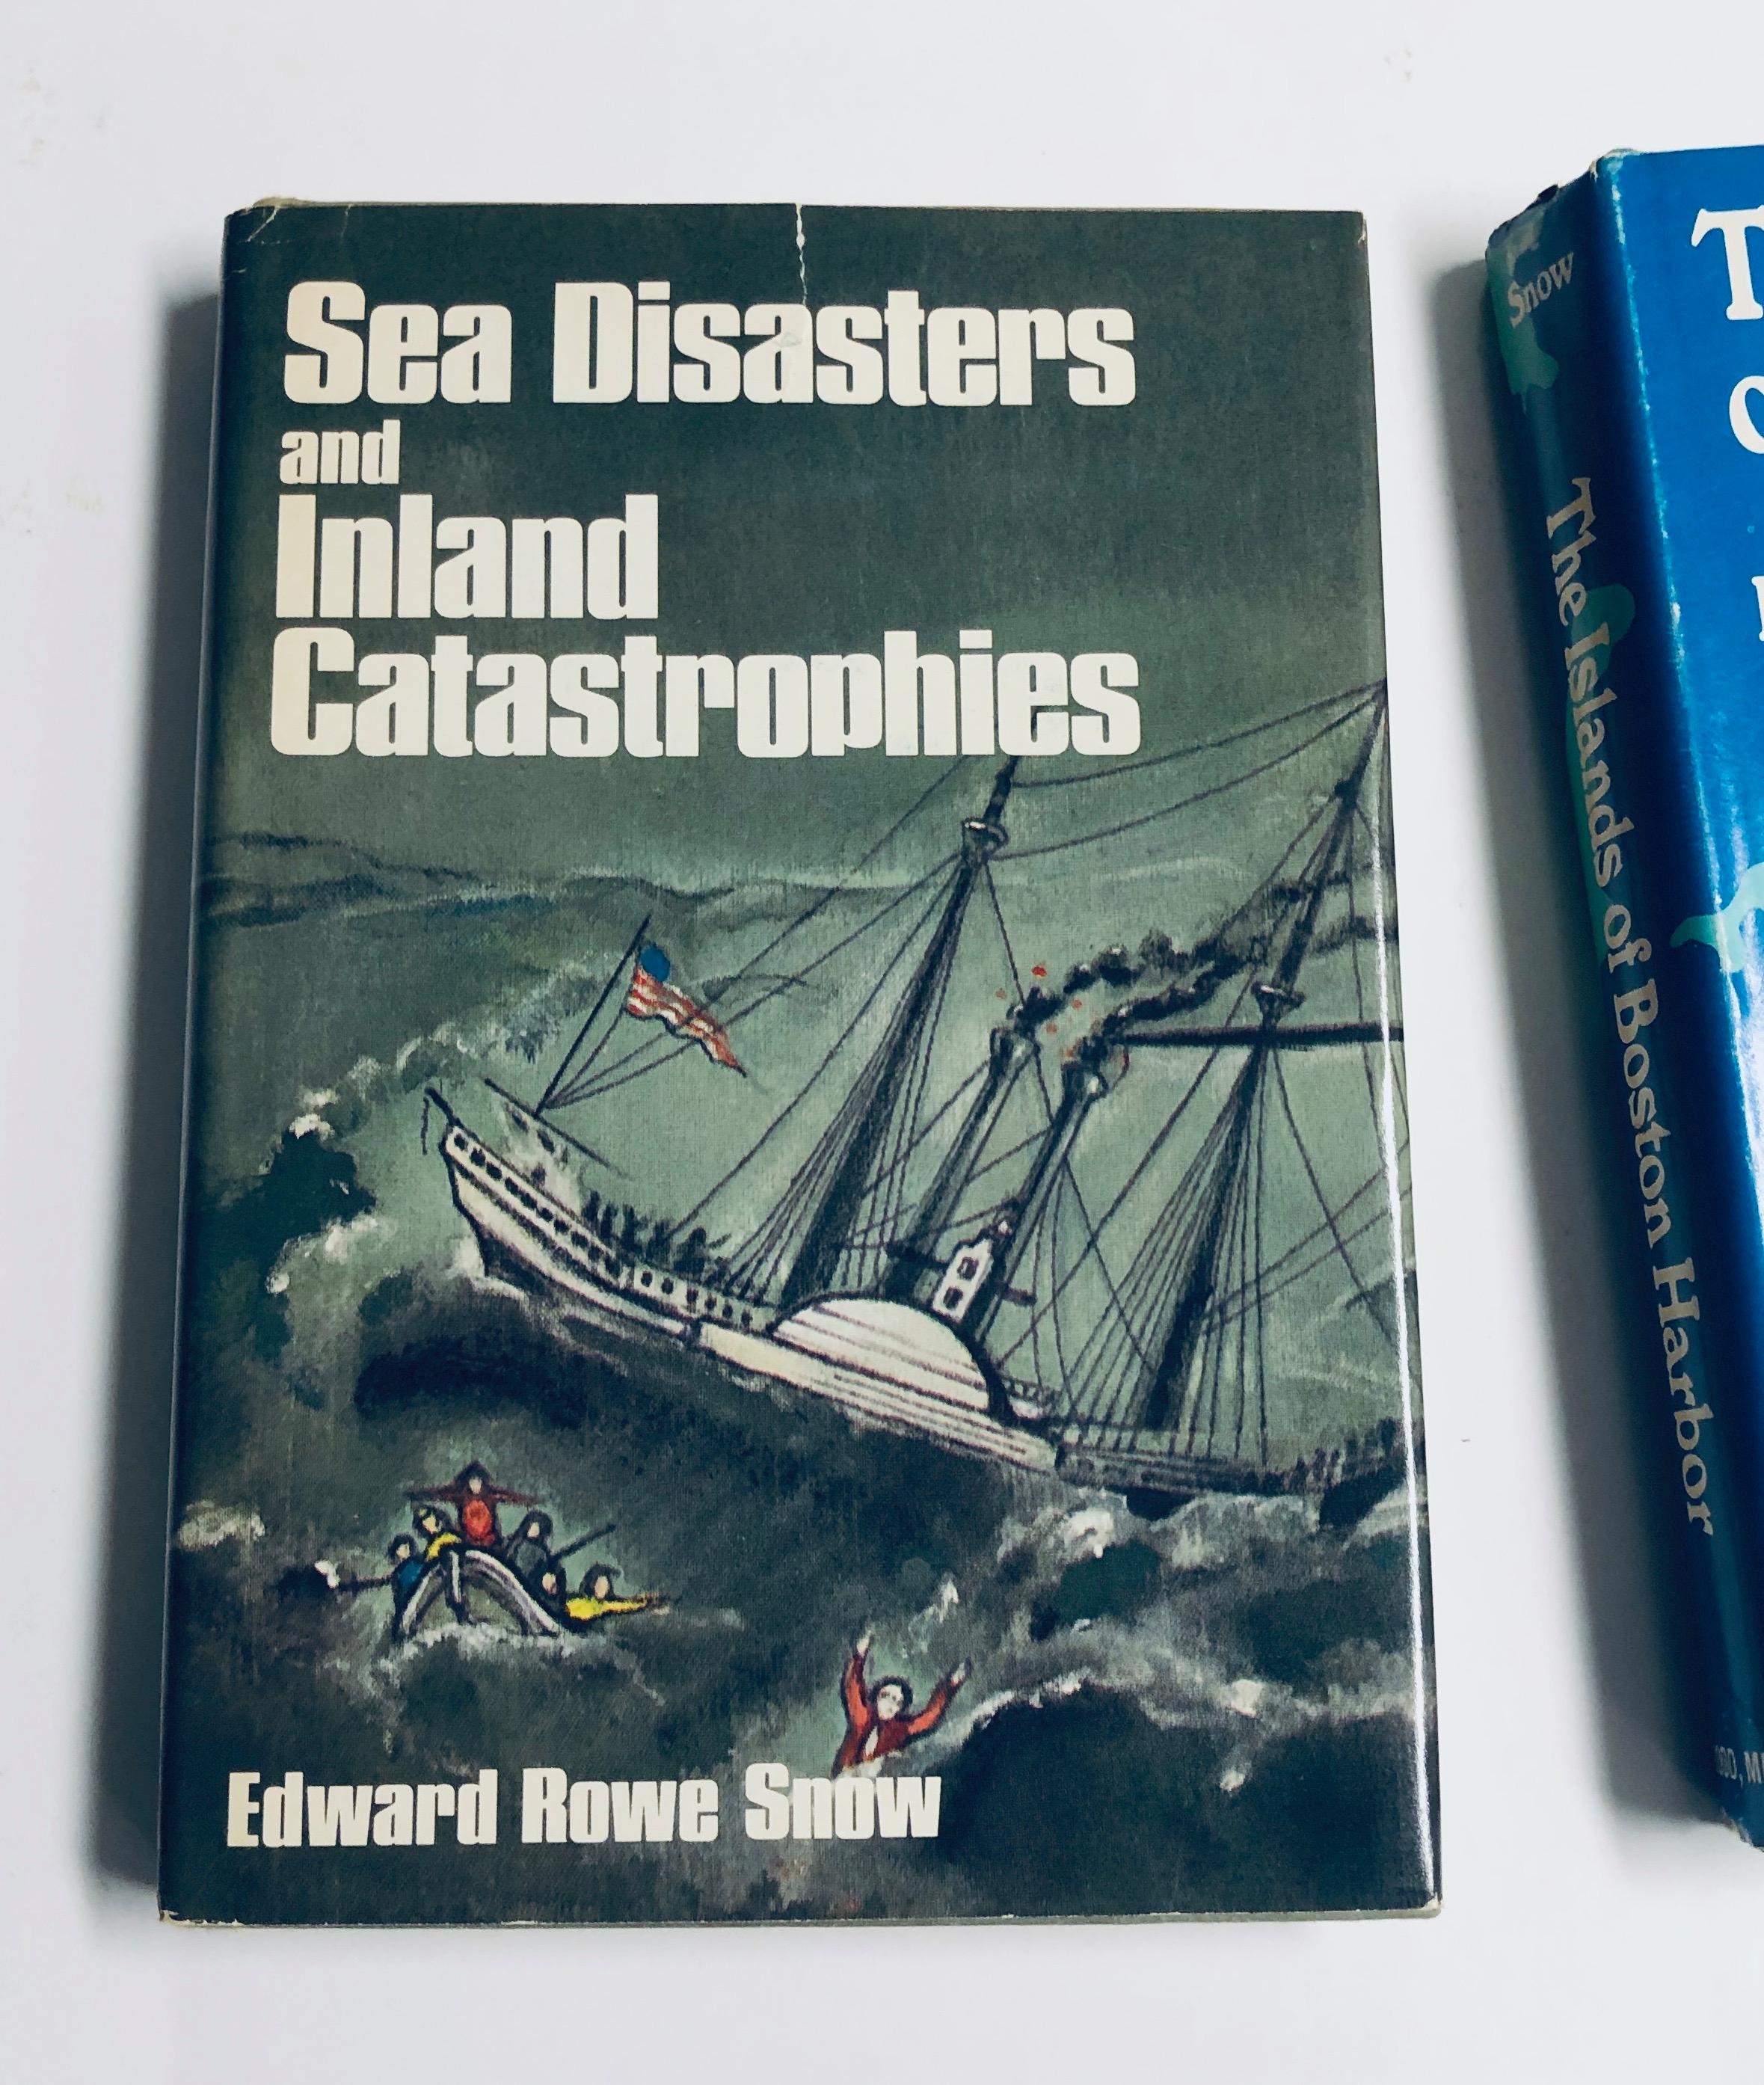 SIGNED Islands of Boston Harbor by EDWARD ROWE SNOW (1971) & Sea Disasters and Islands